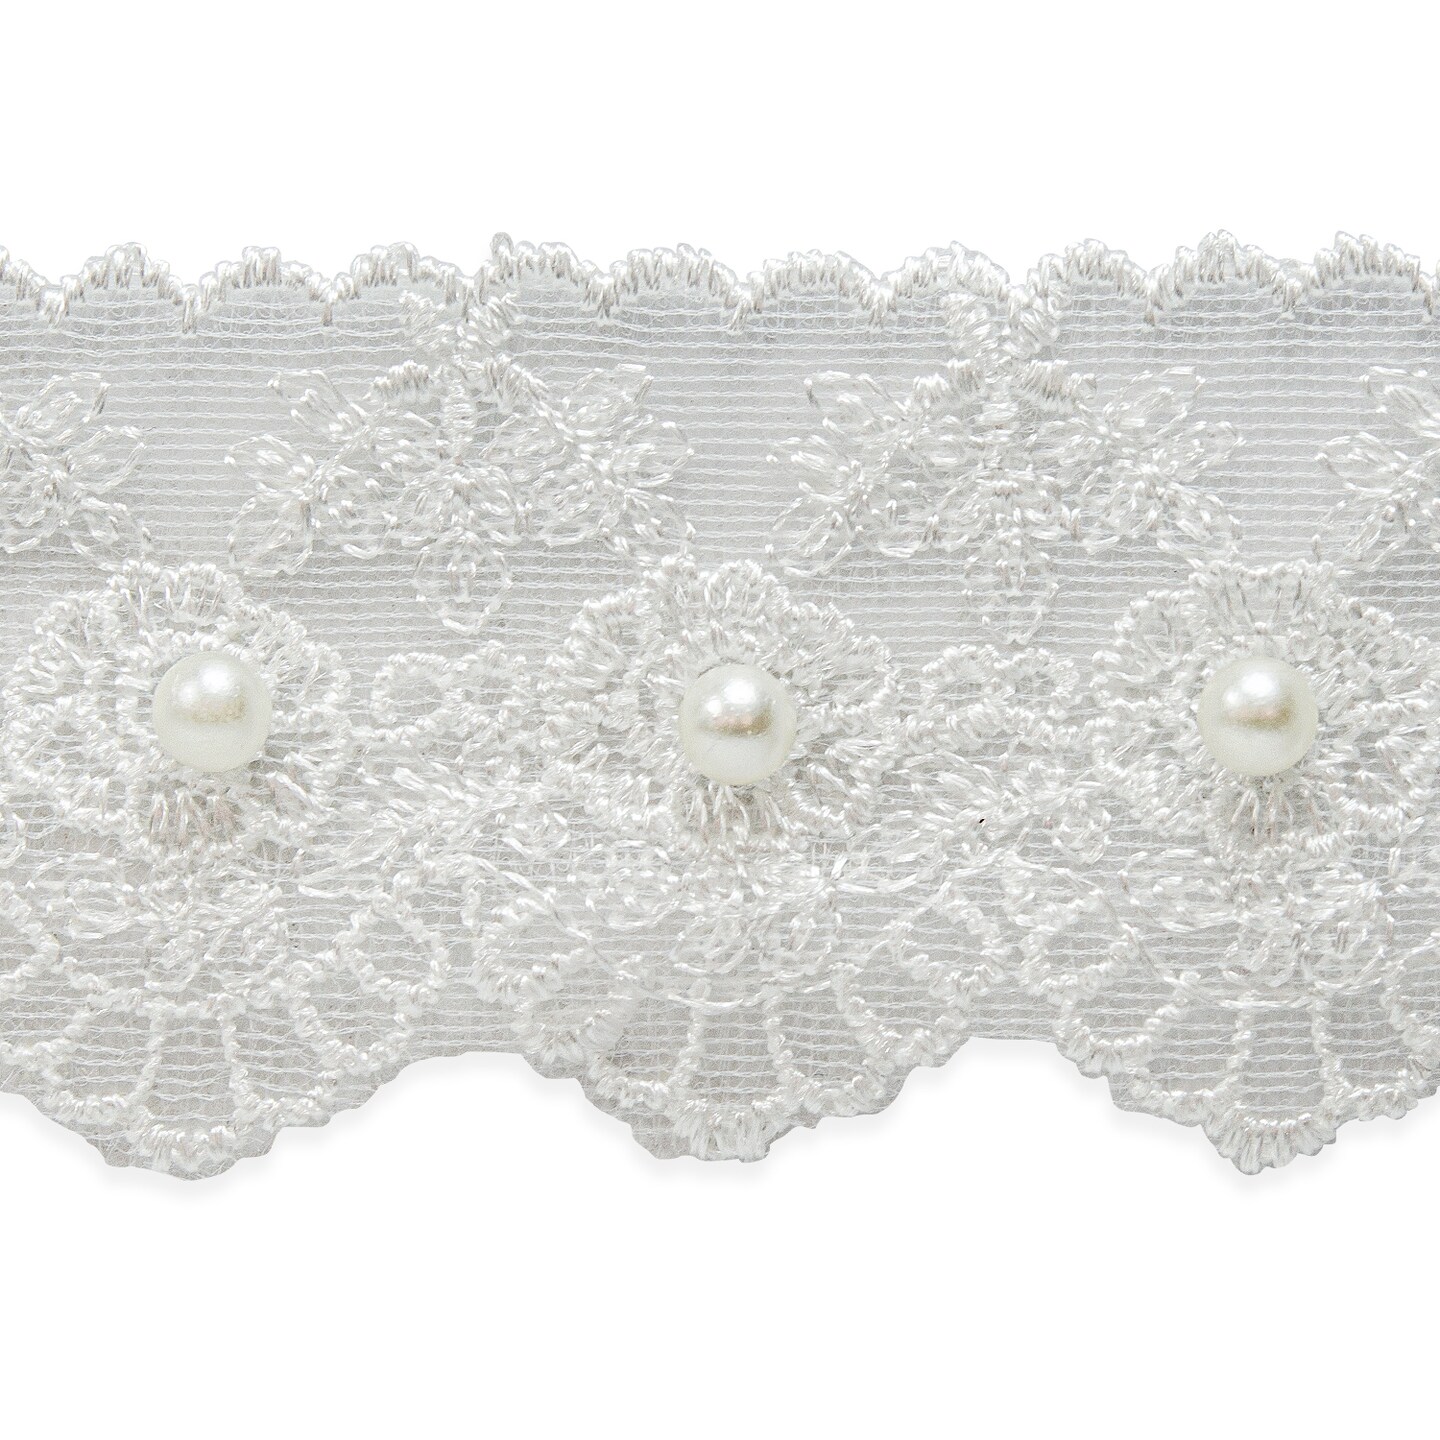 Vintage Roses with Pearls Lace Trim